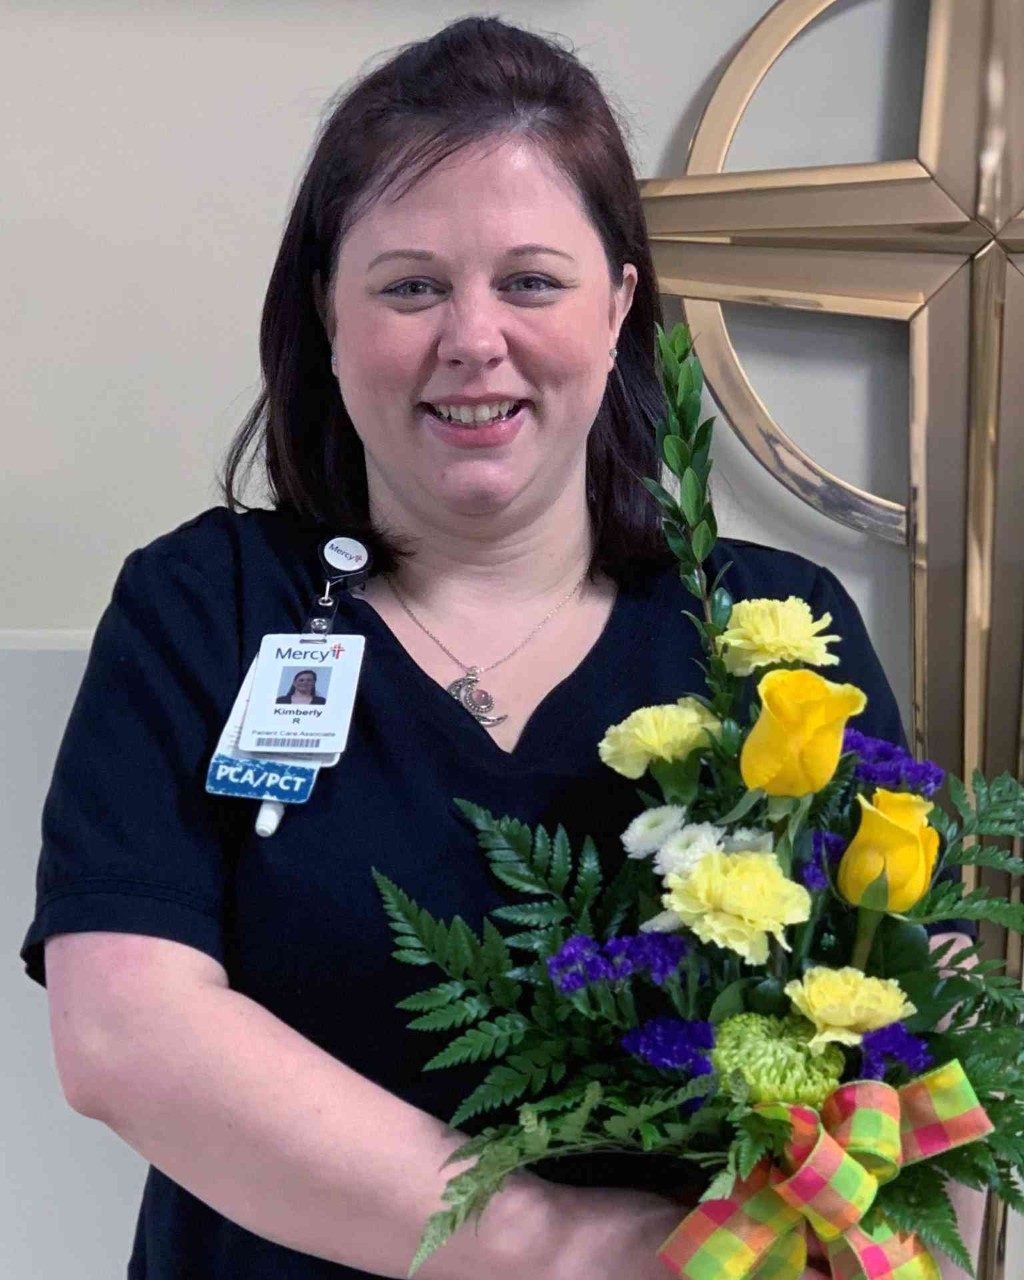 Kimberly Rohr, patient care associate, earned the Daffodil Award for providing outstanding, compassionate care at Mercy Hospital South.